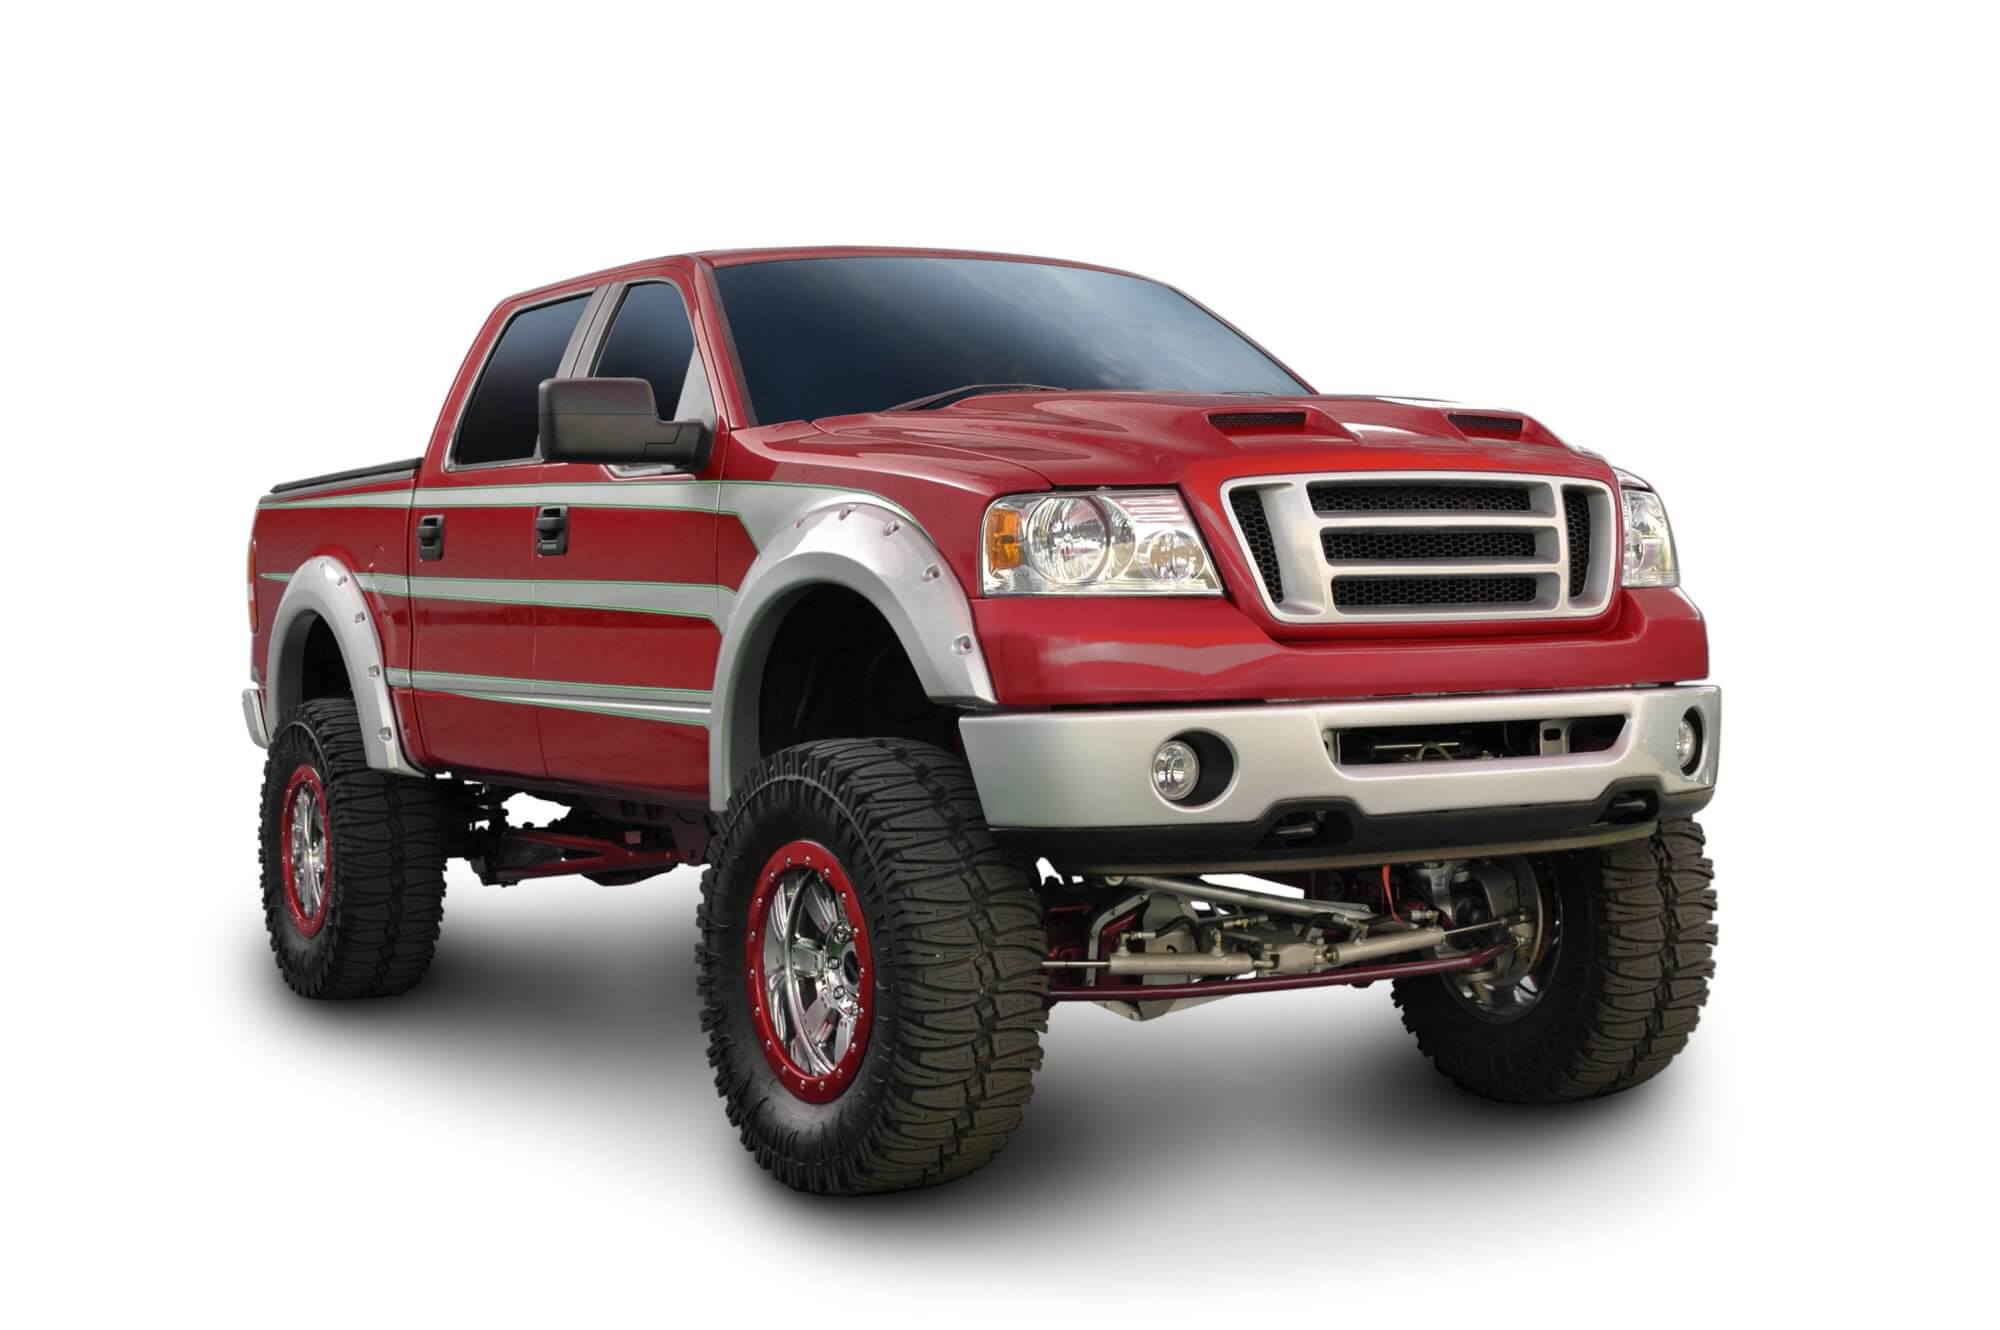 Lift Kit Installation: 5 Reasons to Leave Lift Kit Installation to the